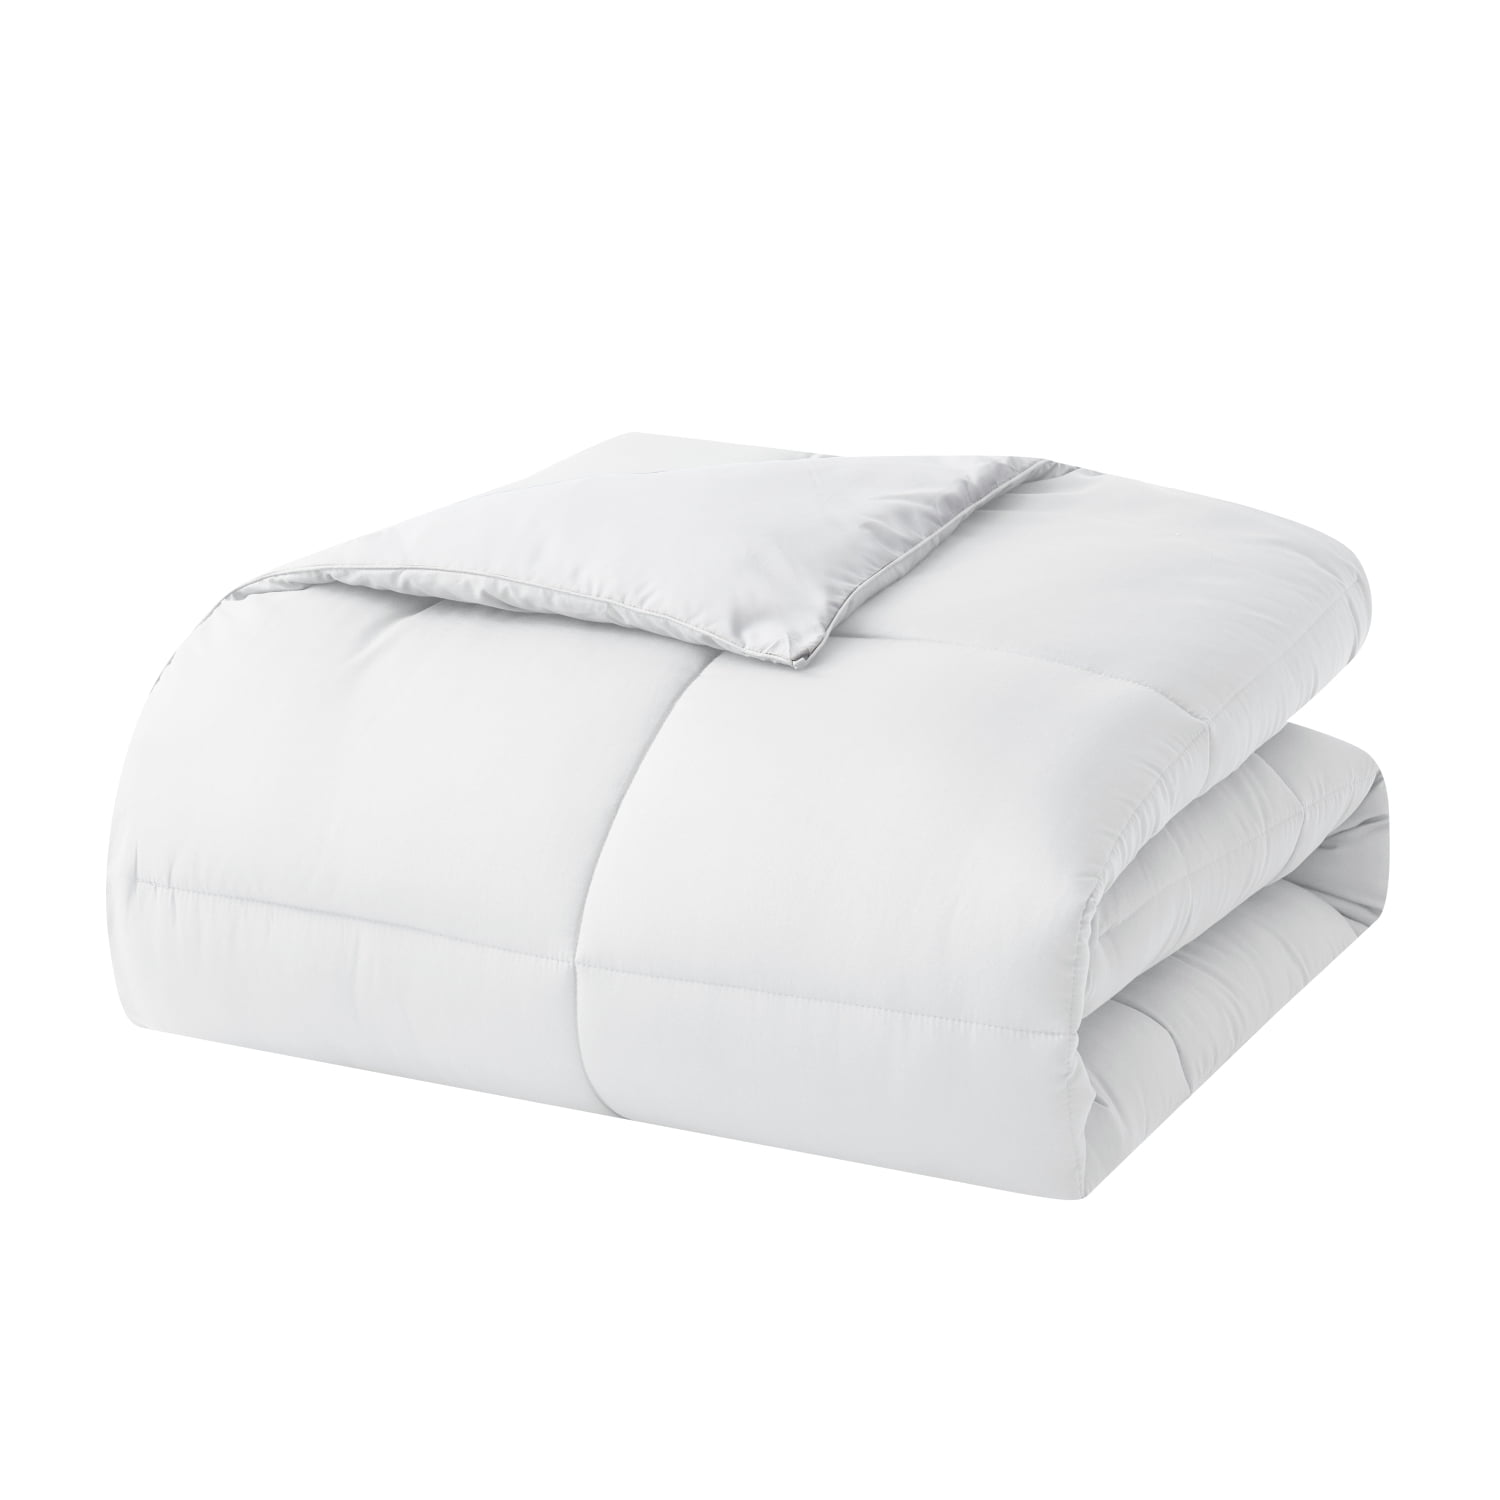 Swift Home All-Season Extra Soft Luxurious Classic Light-Warmth Goose Down-Alternative Comforter, Twin 68 inch x 90 inch, White